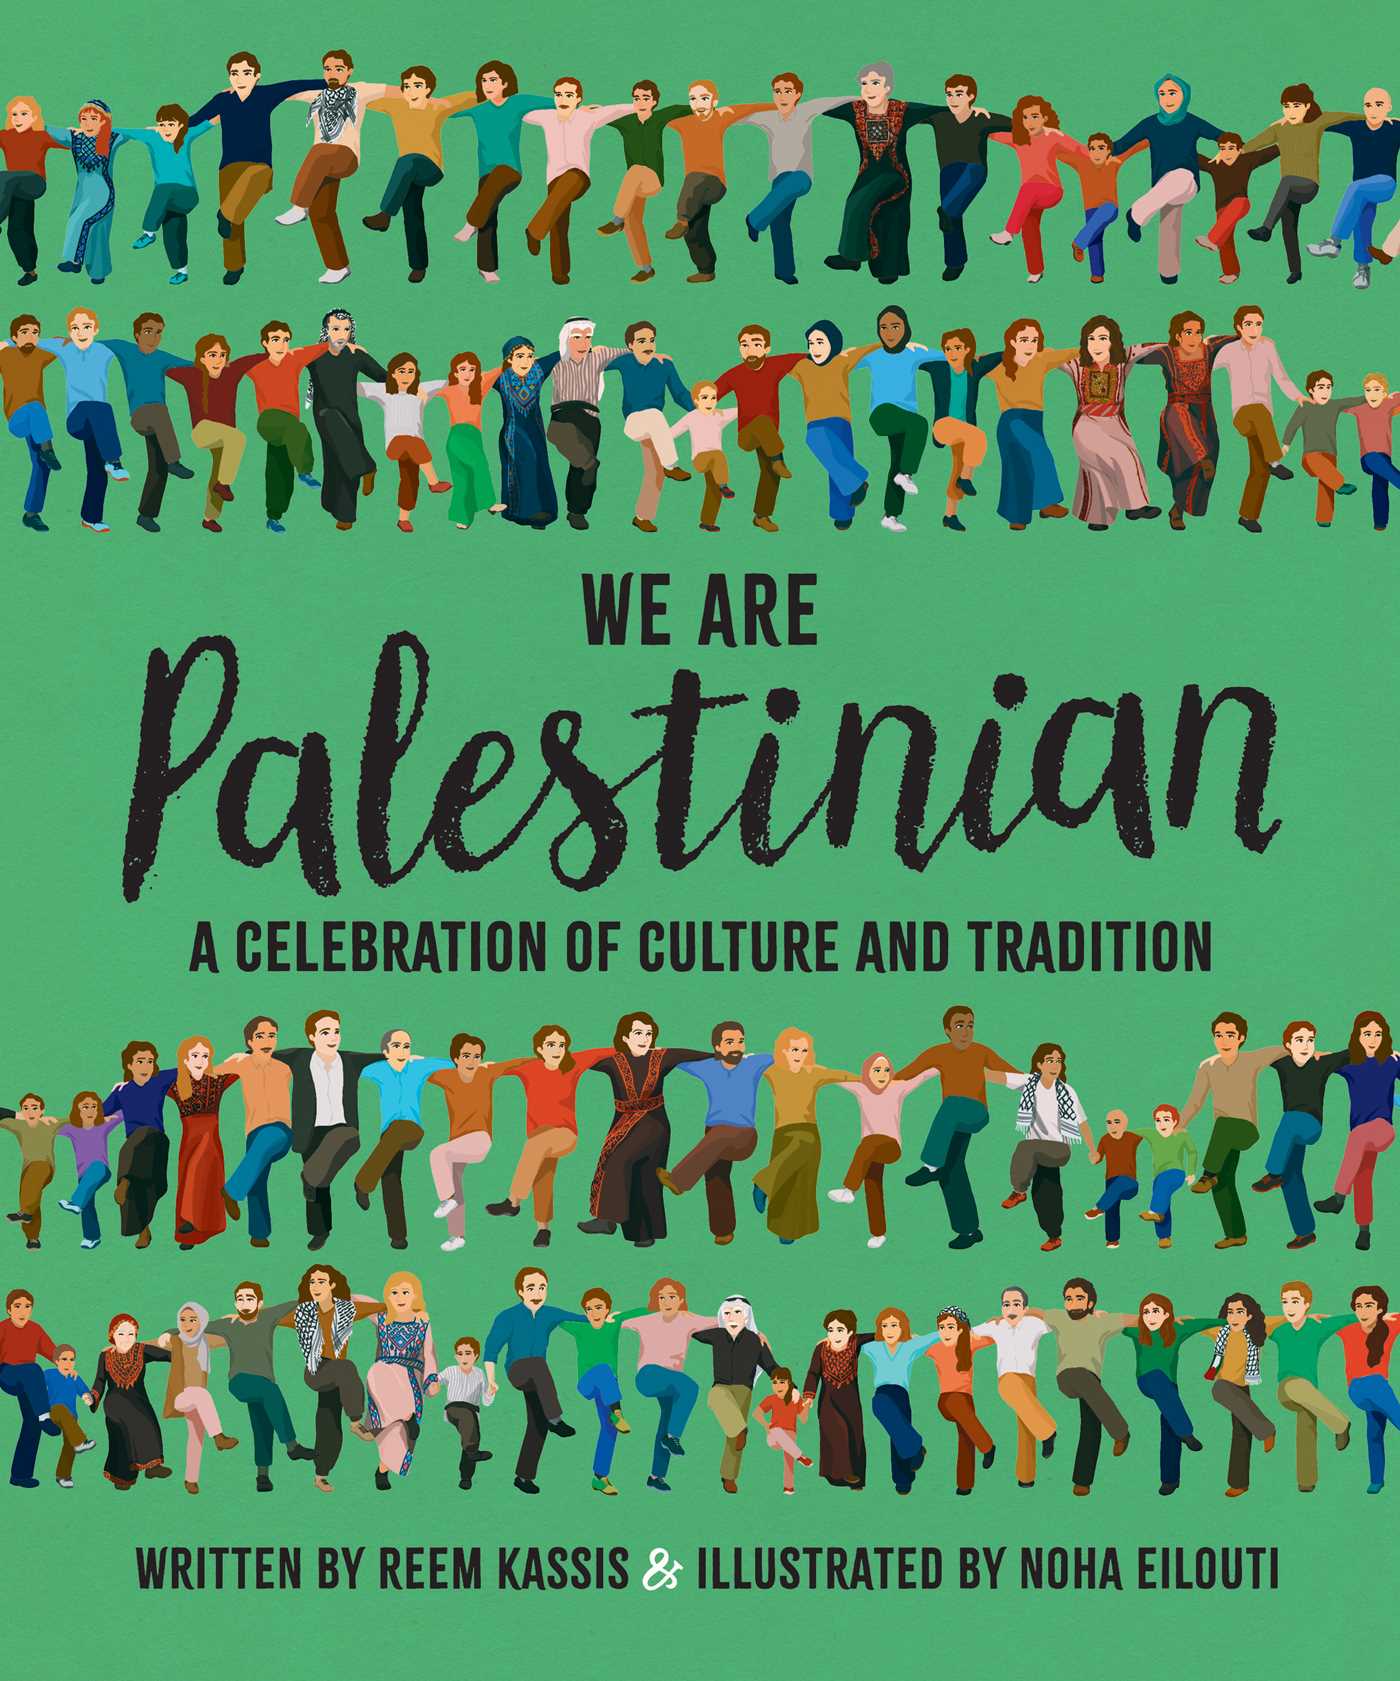 Representation Matters: The Palestinian Experience